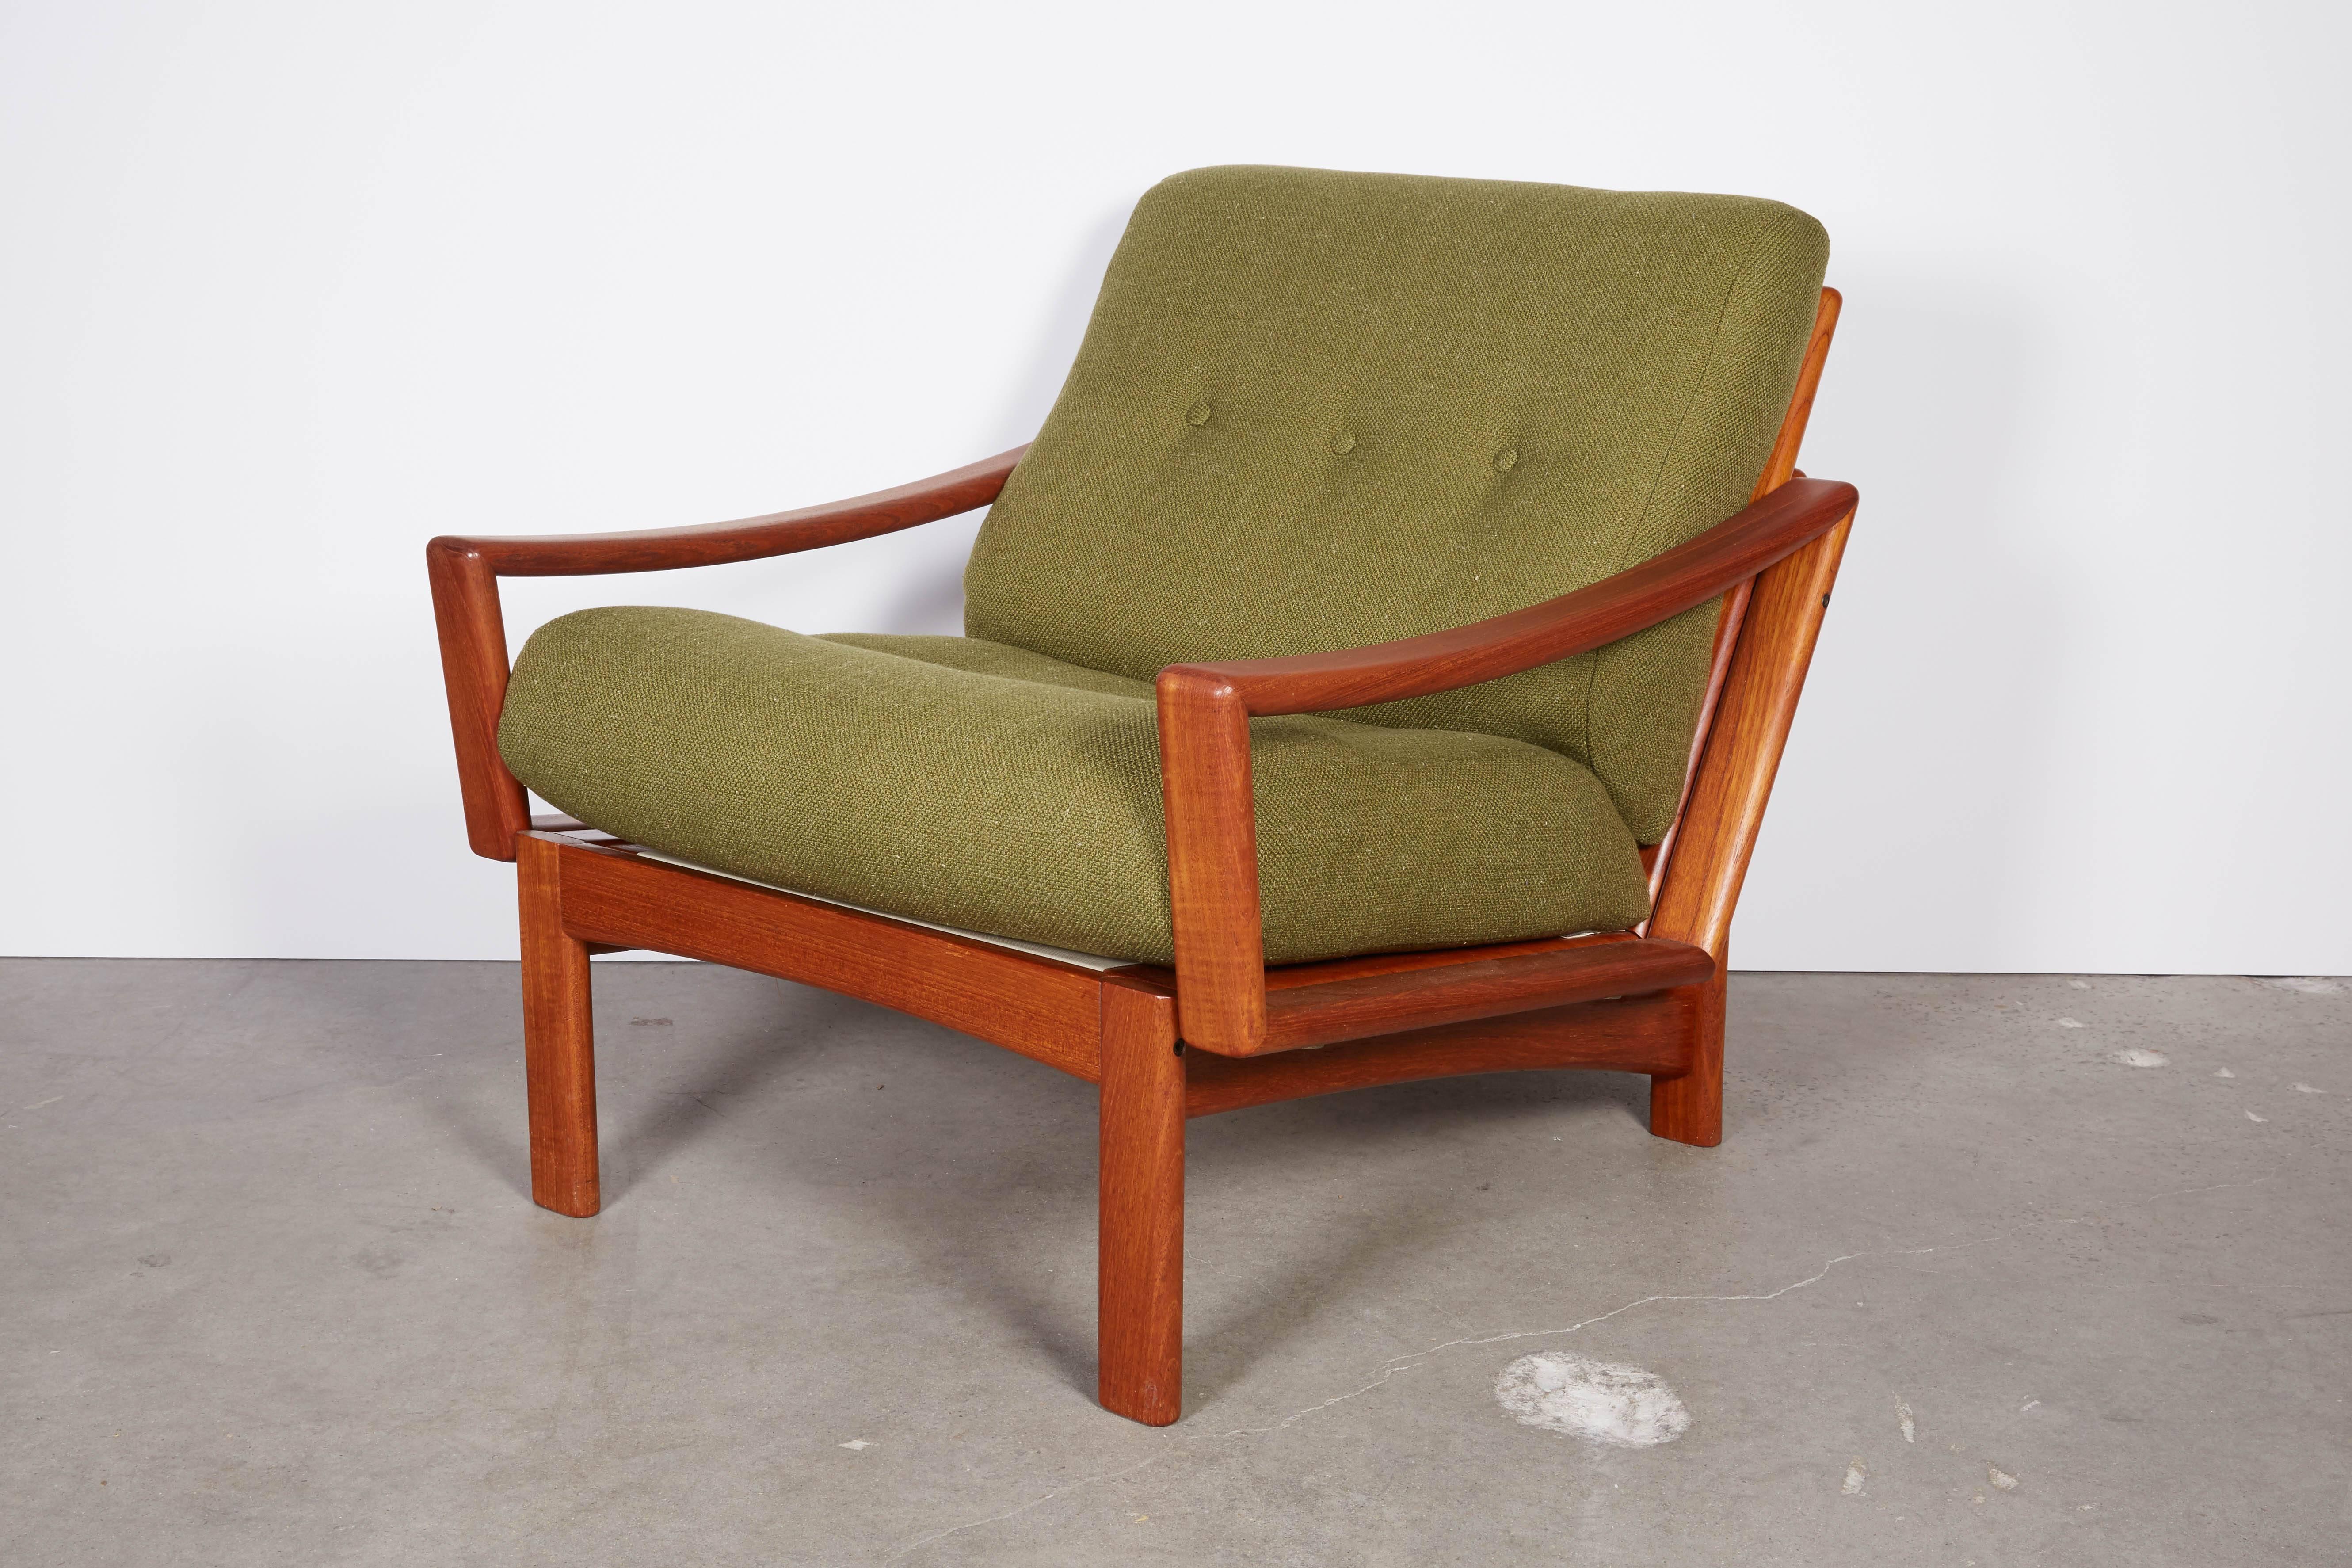 Danish 1960s Teak Arm Chair

This Modern club chair is in excellent condition. The cushions are this amazing shape that gives the best lumbar support I've ever experience. Newly upholstered, or send in your fabric you would like to see it in. Labor